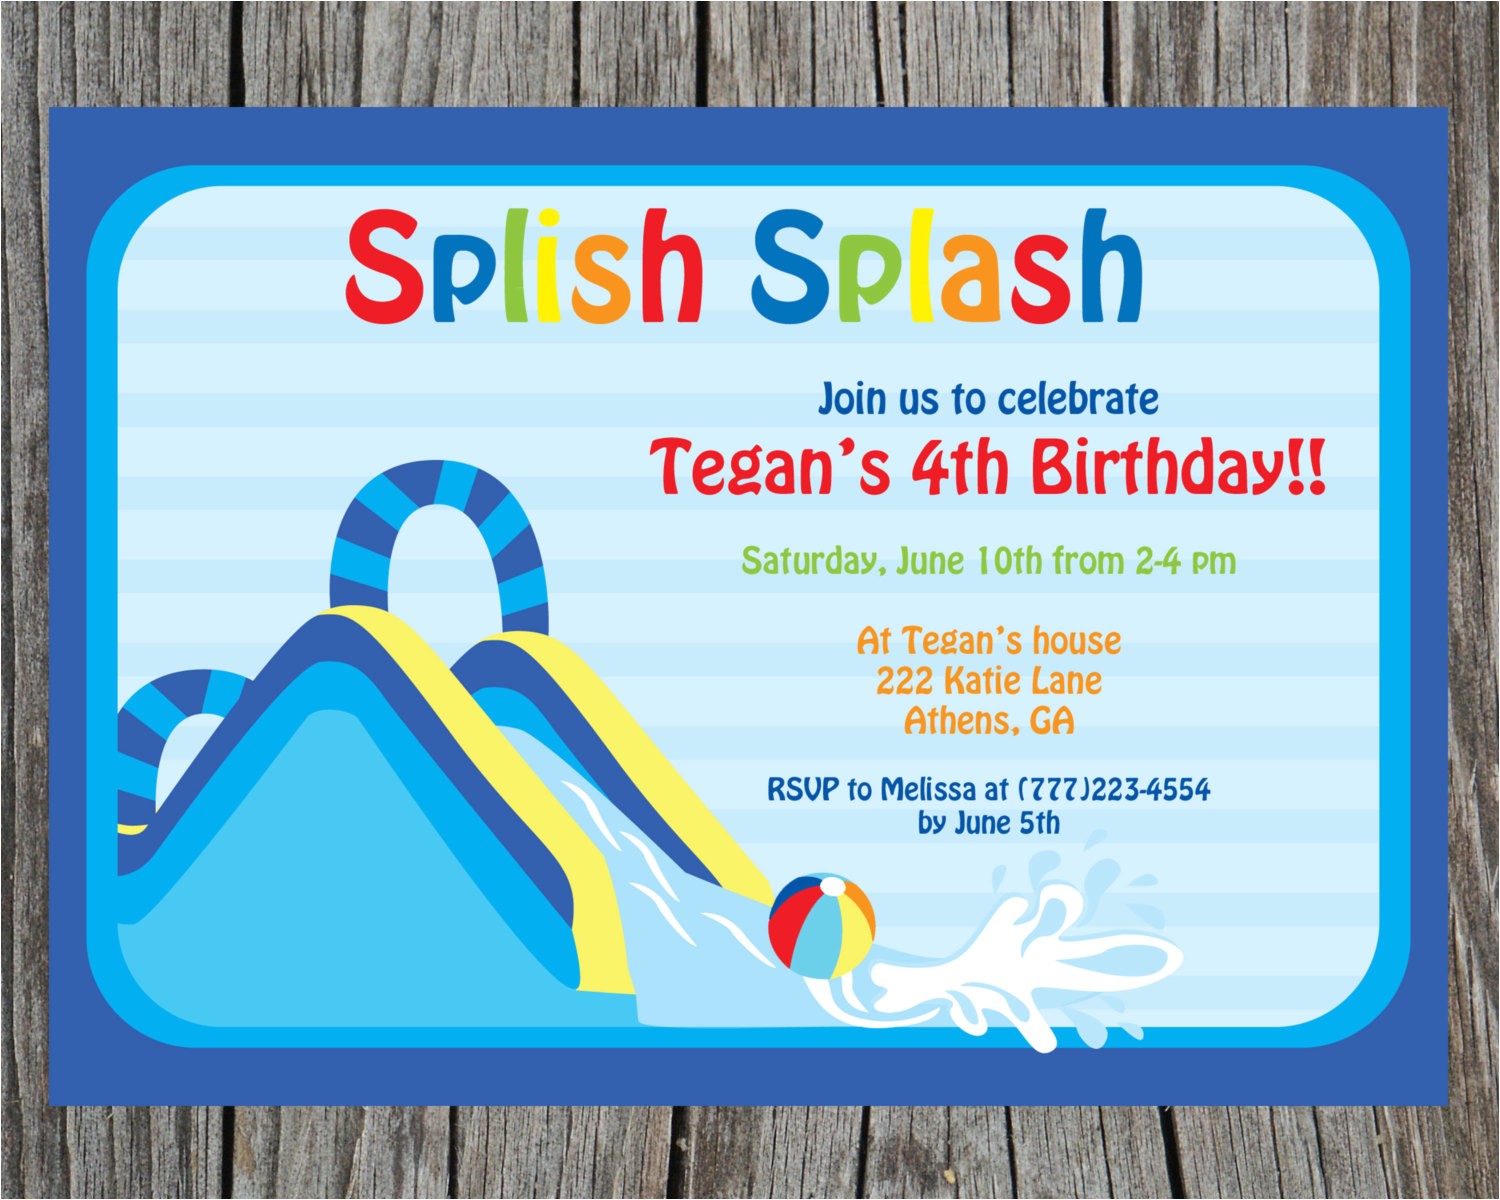 Water Slide Party Invitations Waterslide Party Waterslide Invite Water Fun Invitation